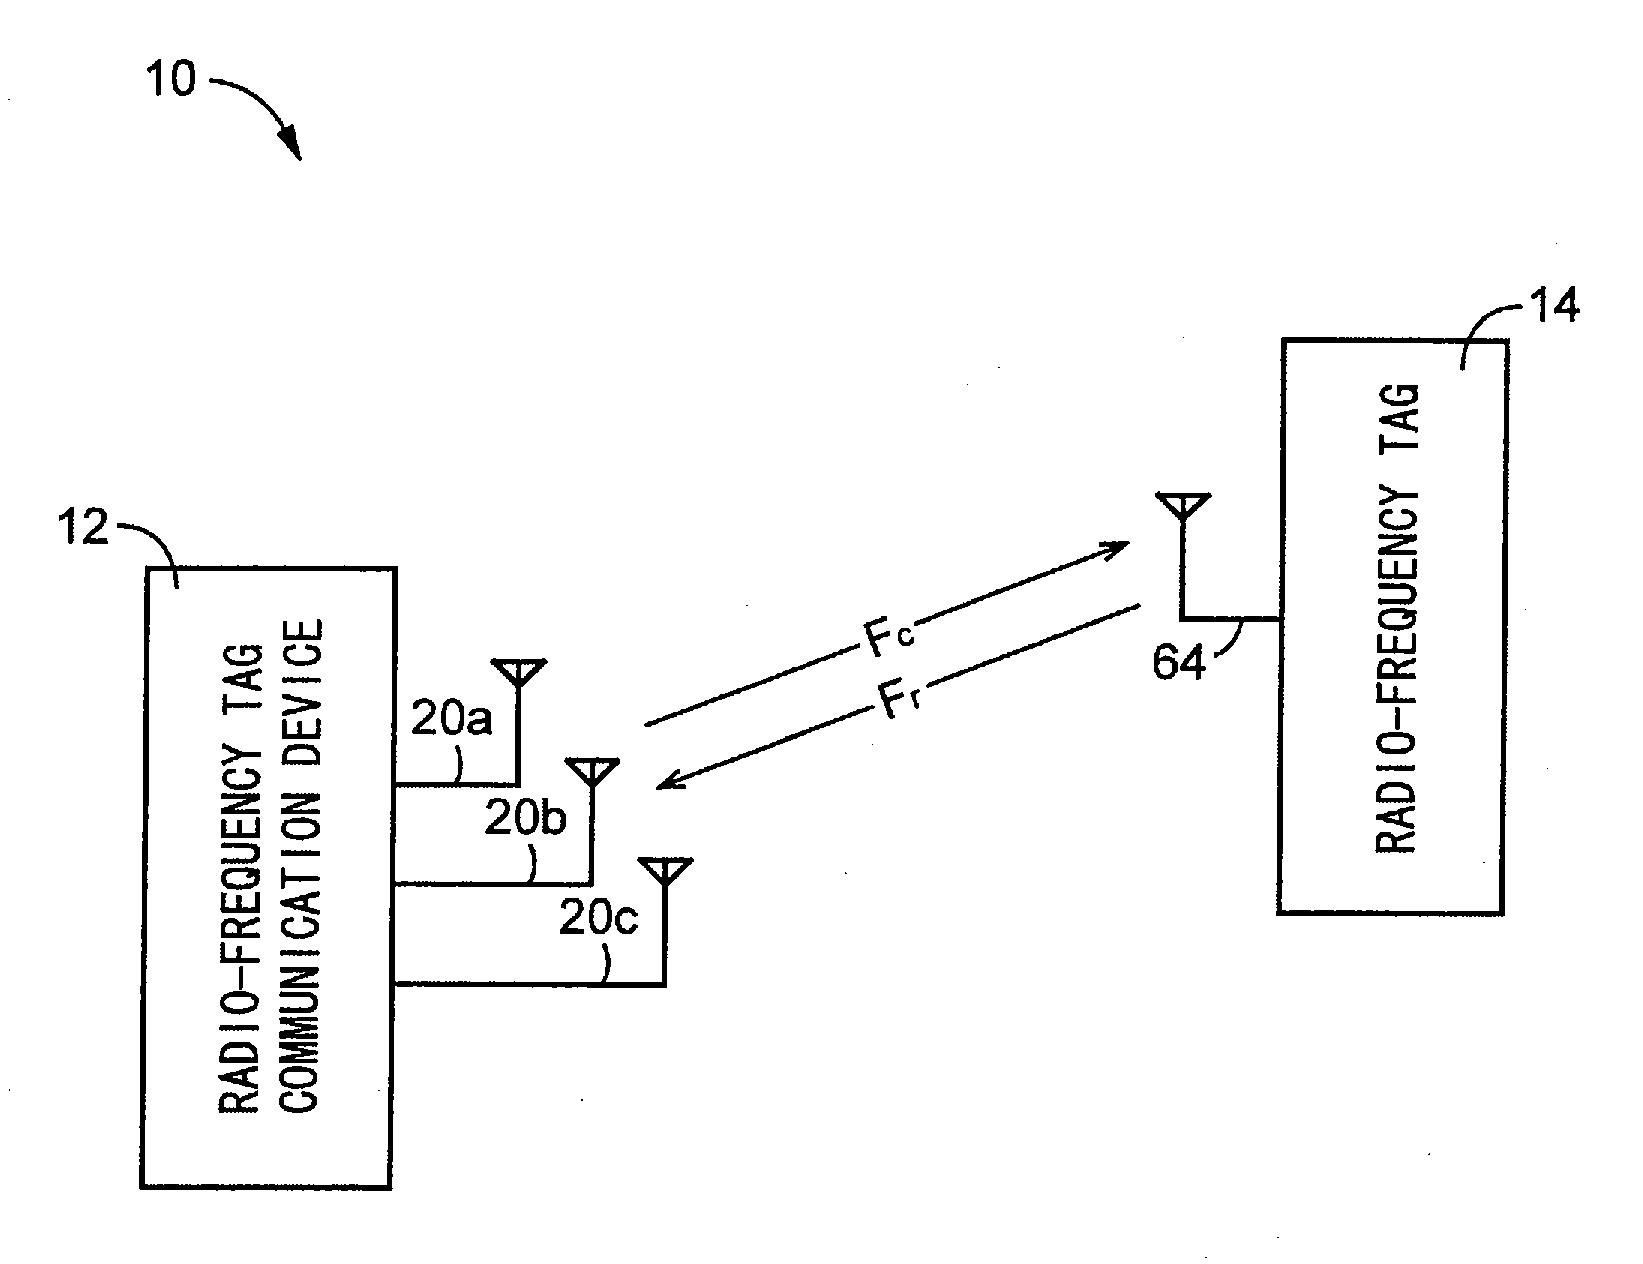 Radio-frequency communication device